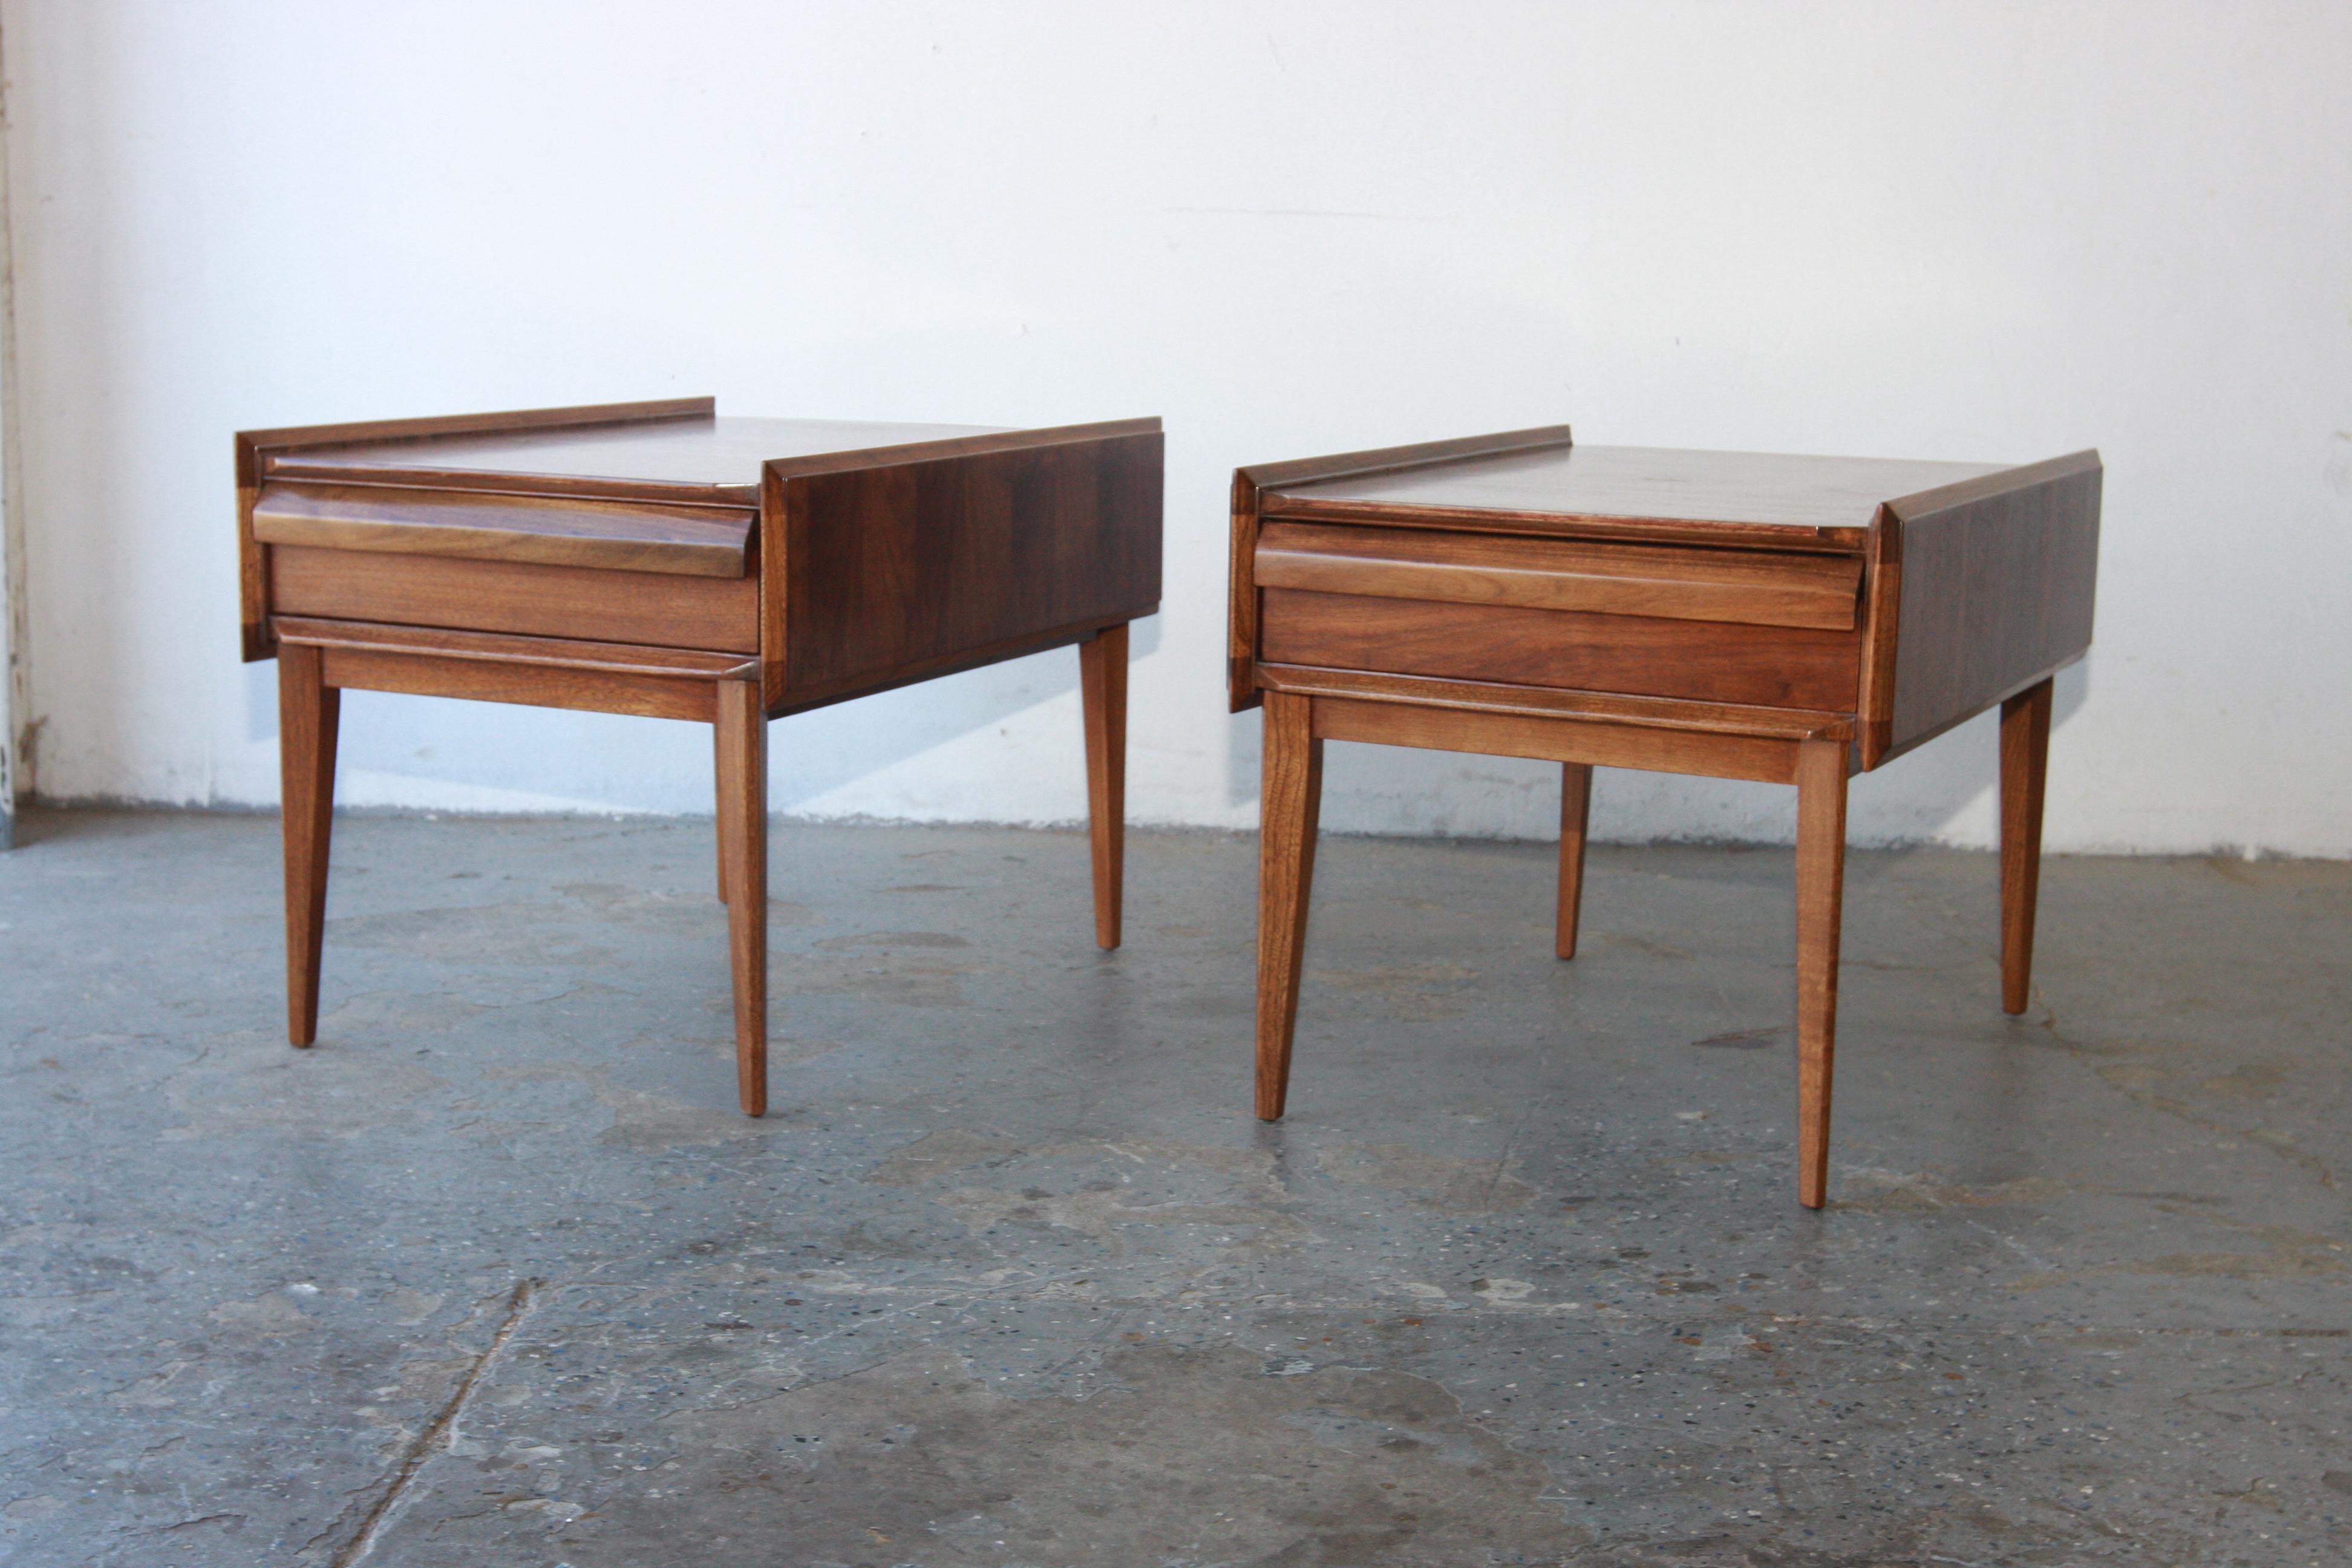 American Mid Century Modern Walnut End Tables First Edition Collection by Lane For Sale